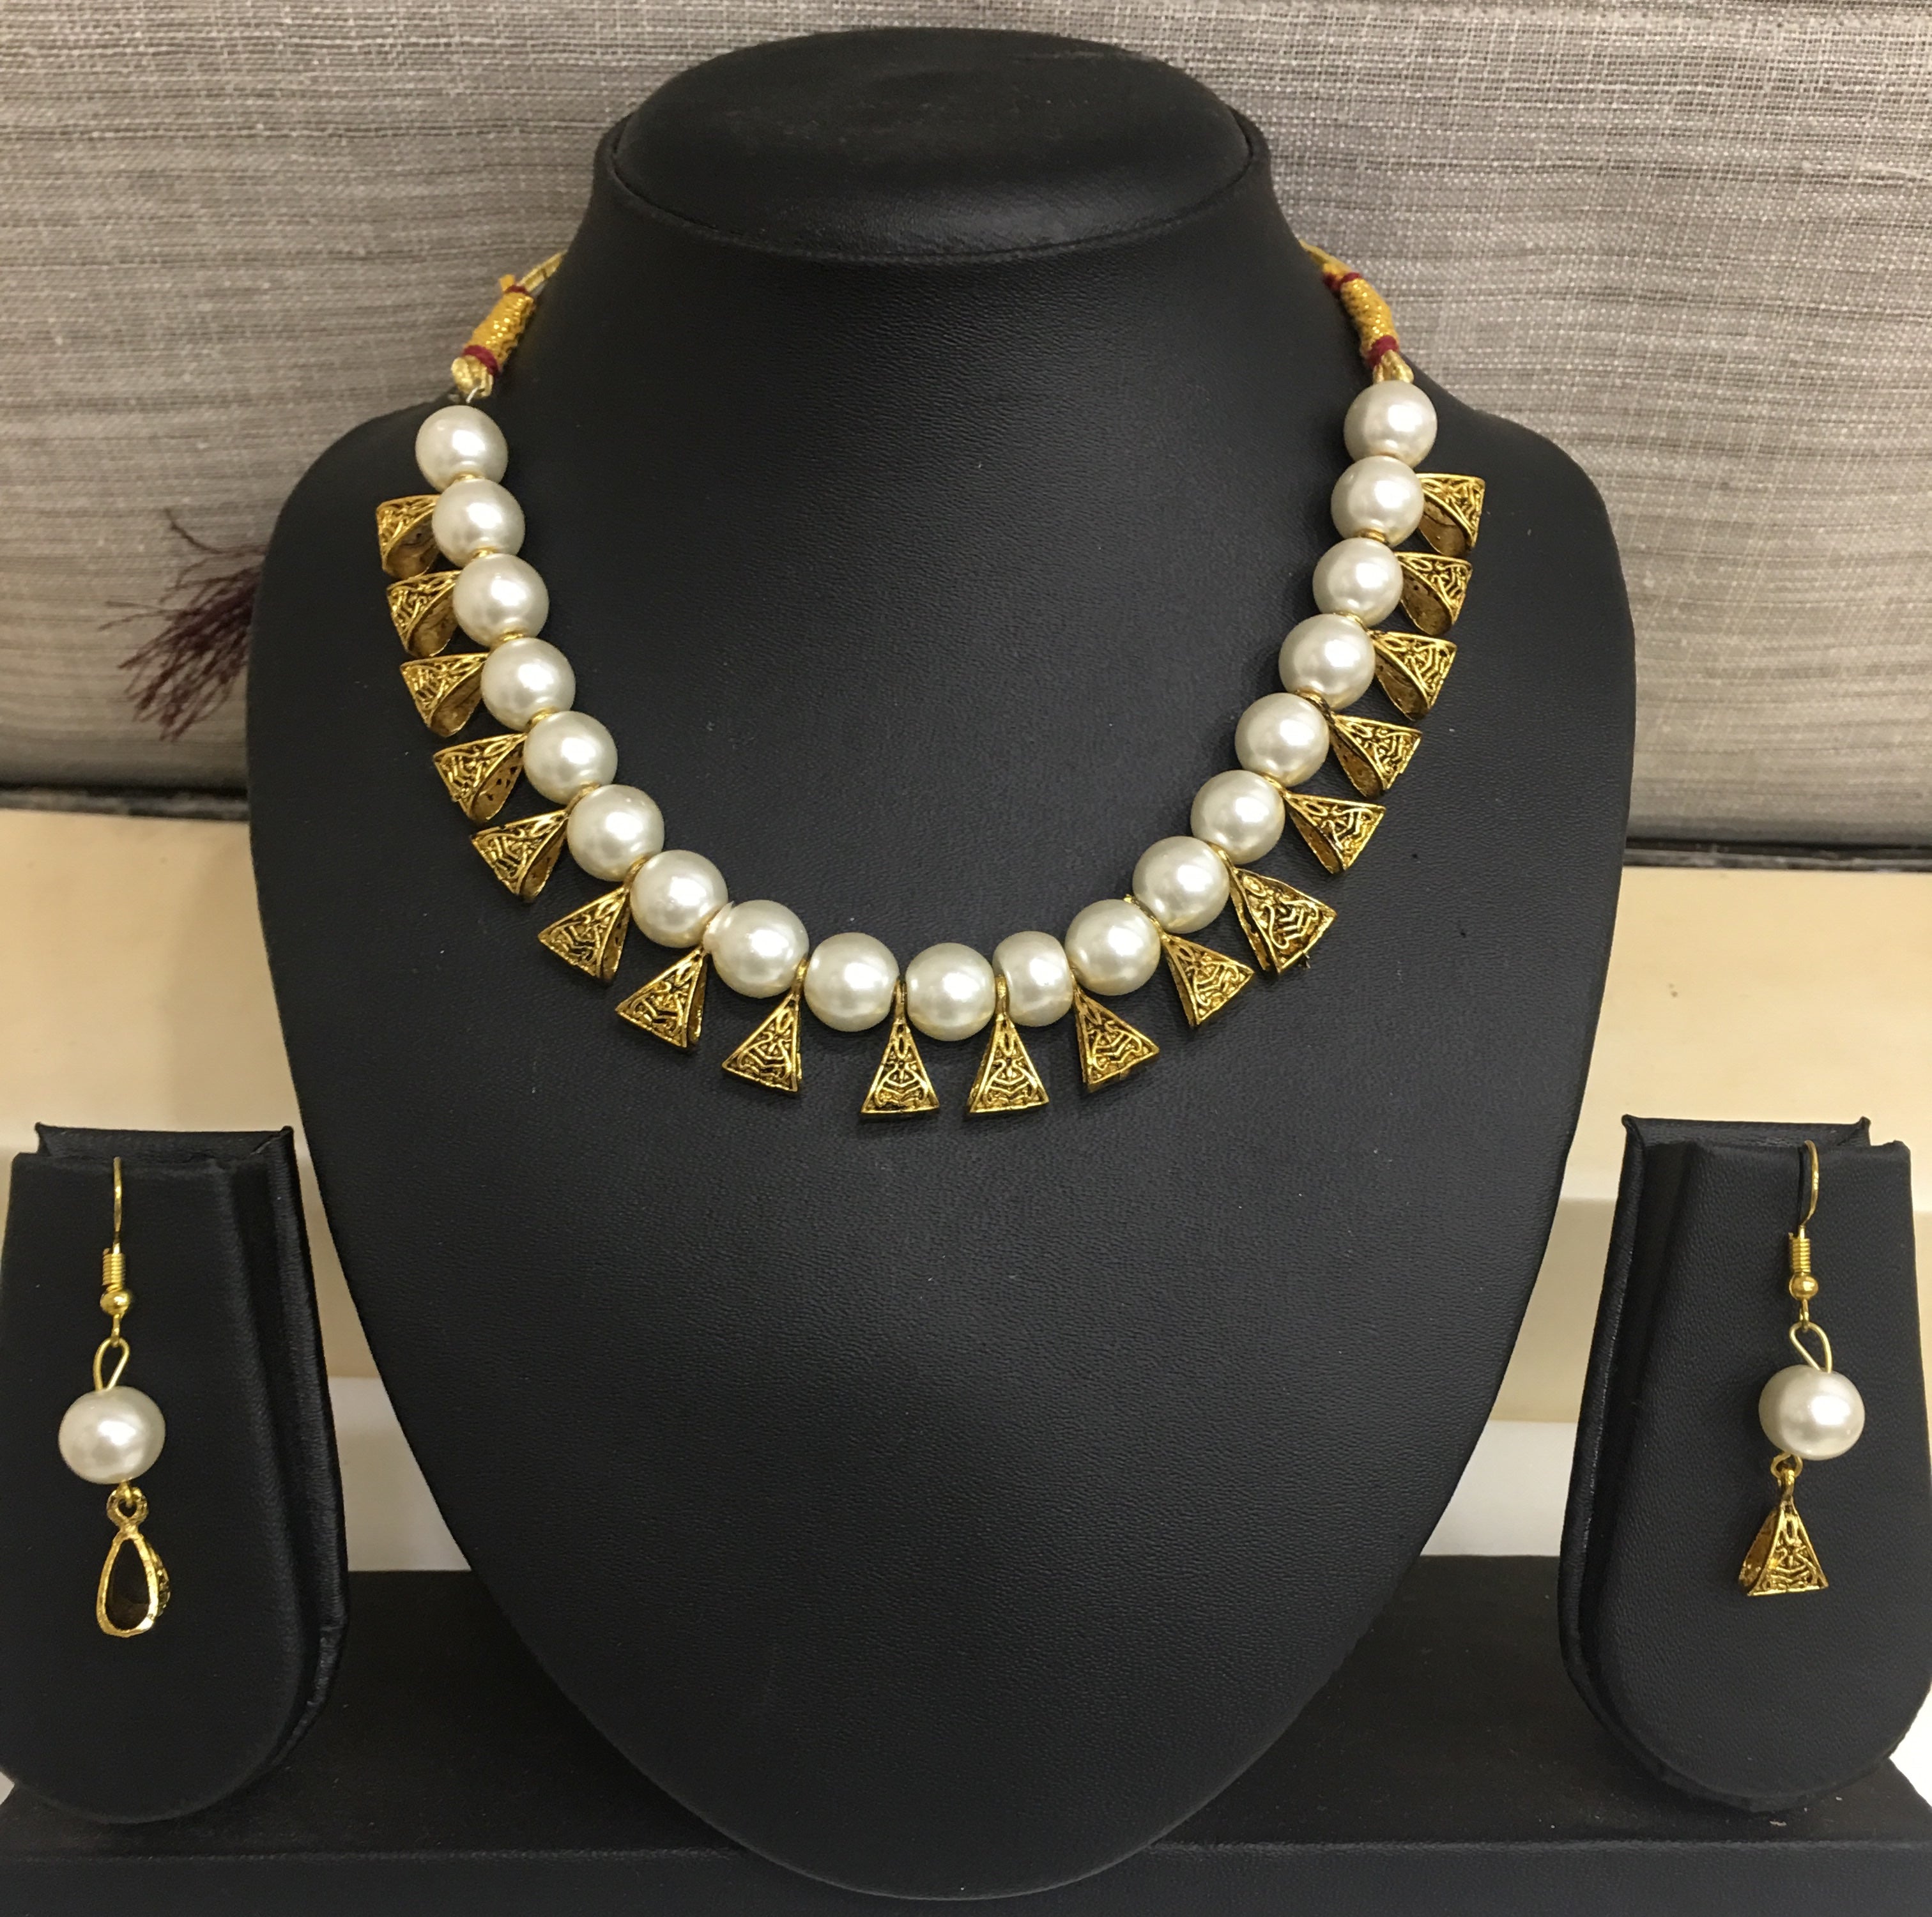 image for Antique Gold Triangle Beads and White Pearls Necklace Earring Set for Women Girls Costume Fashion Artifical Imitation Jewellery